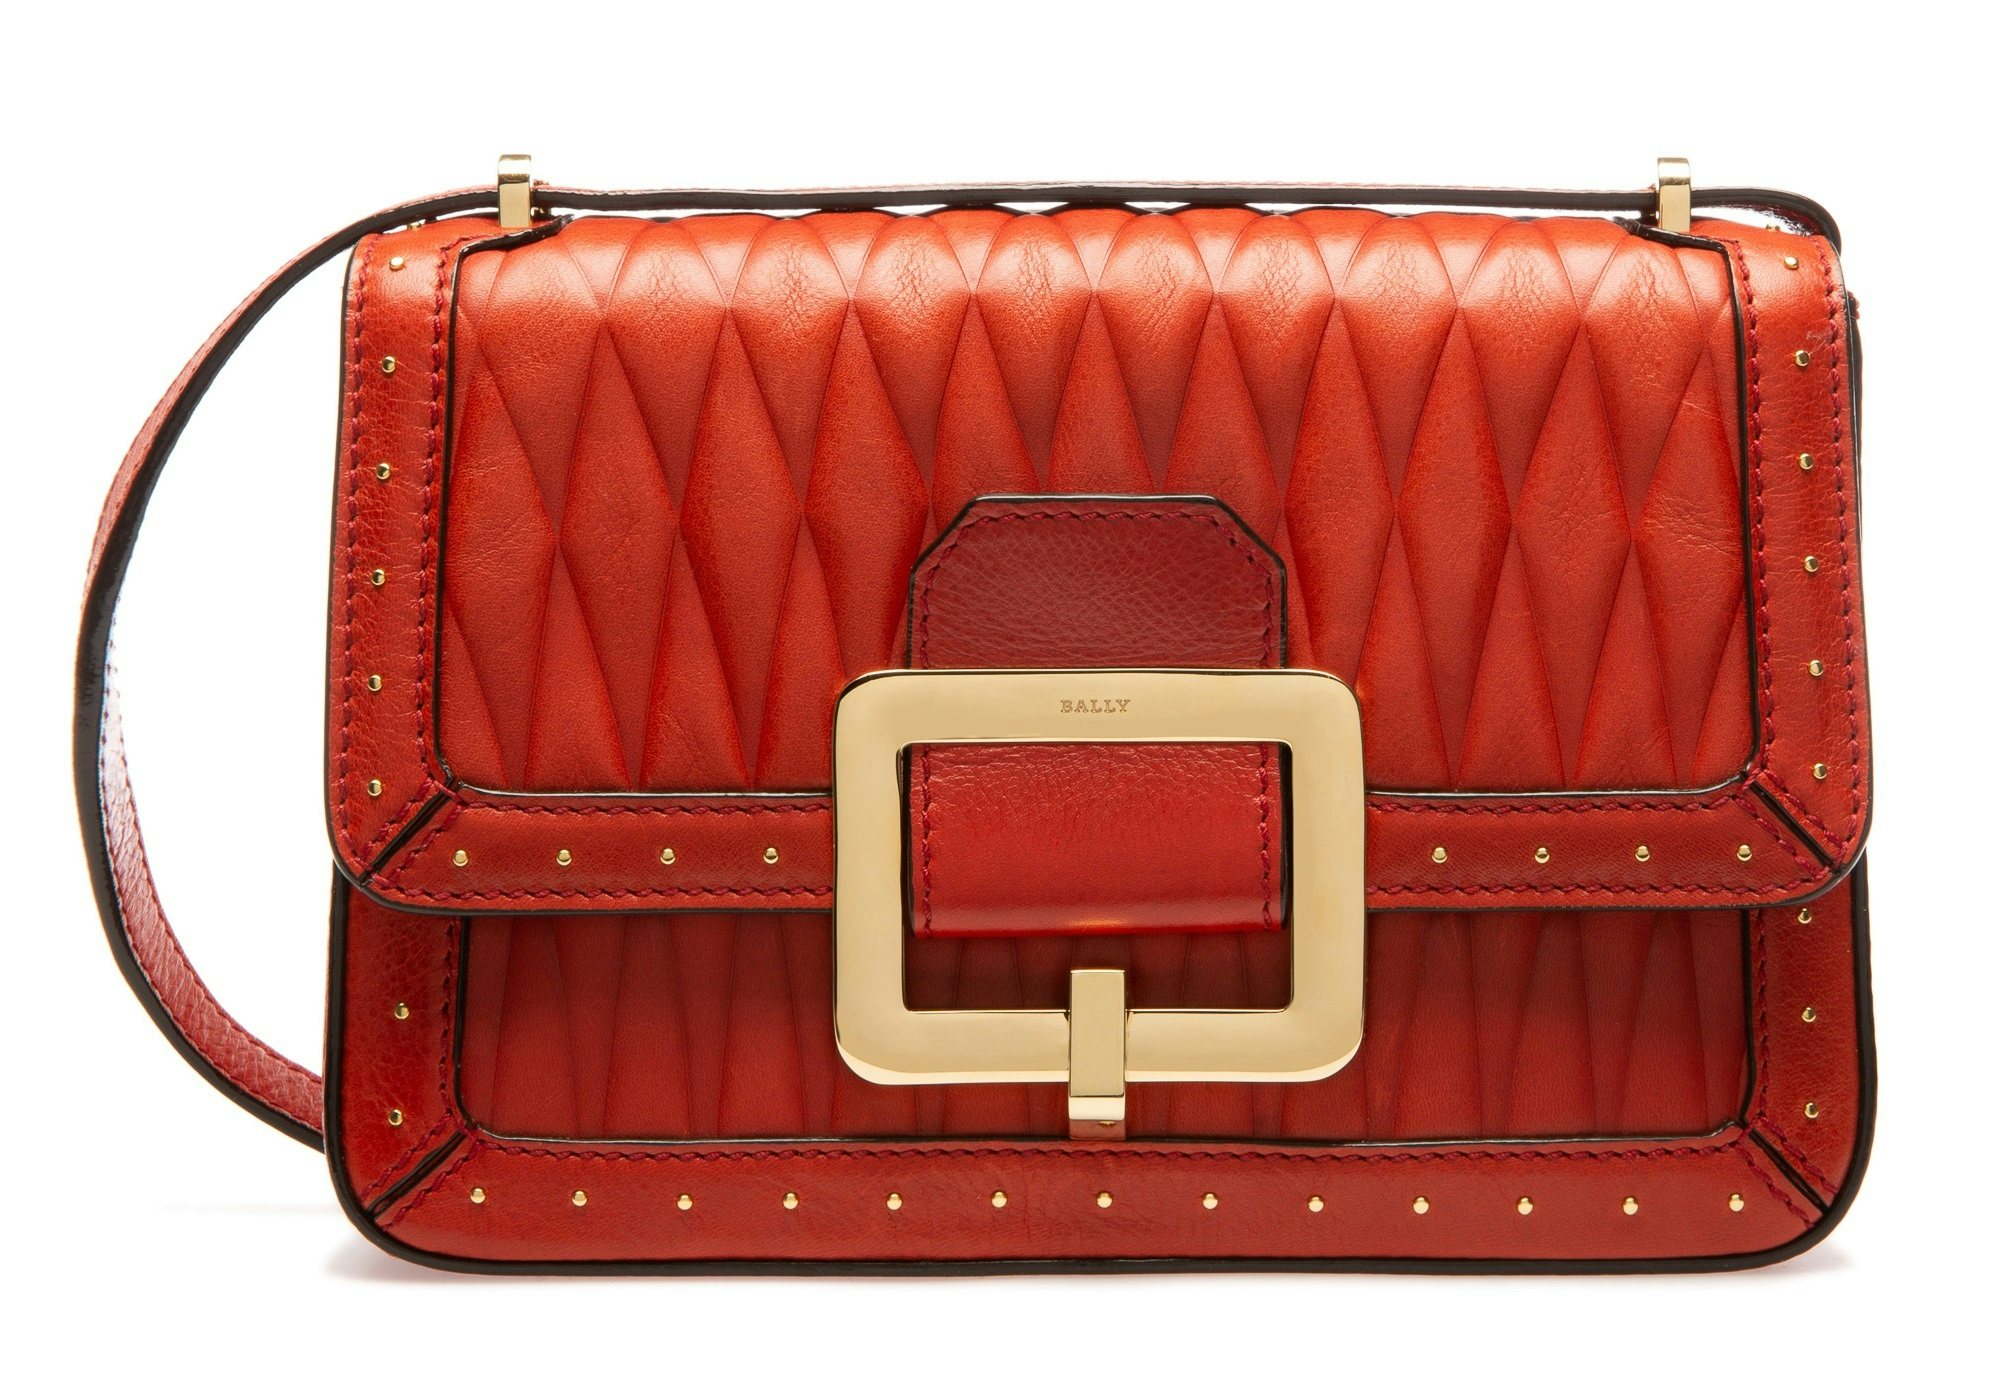 Bally's Janelle Bag in red. Photo: Courtesy of Bally